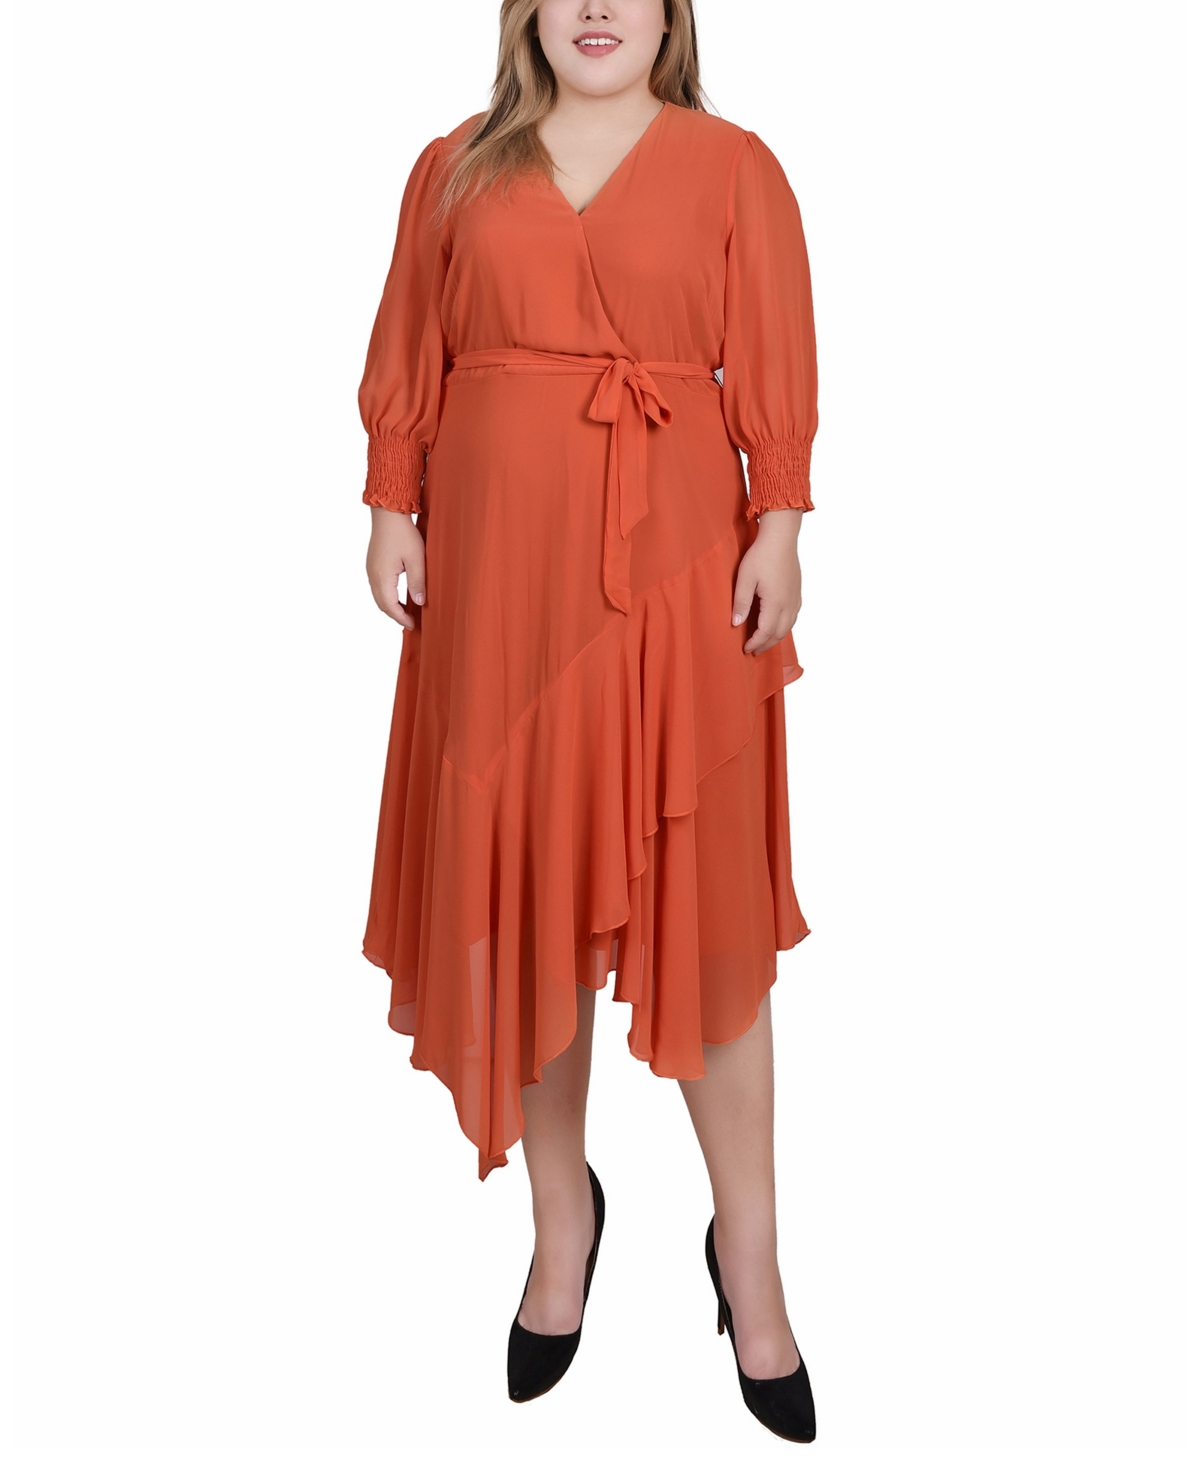 Great Gatsby Dress – Great Gatsby Dresses for Sale Ny Collection Plus Size 34 Sleeve Belted Chiffon Handkerchief Hem Dress - Orange Rust $27.90 AT vintagedancer.com